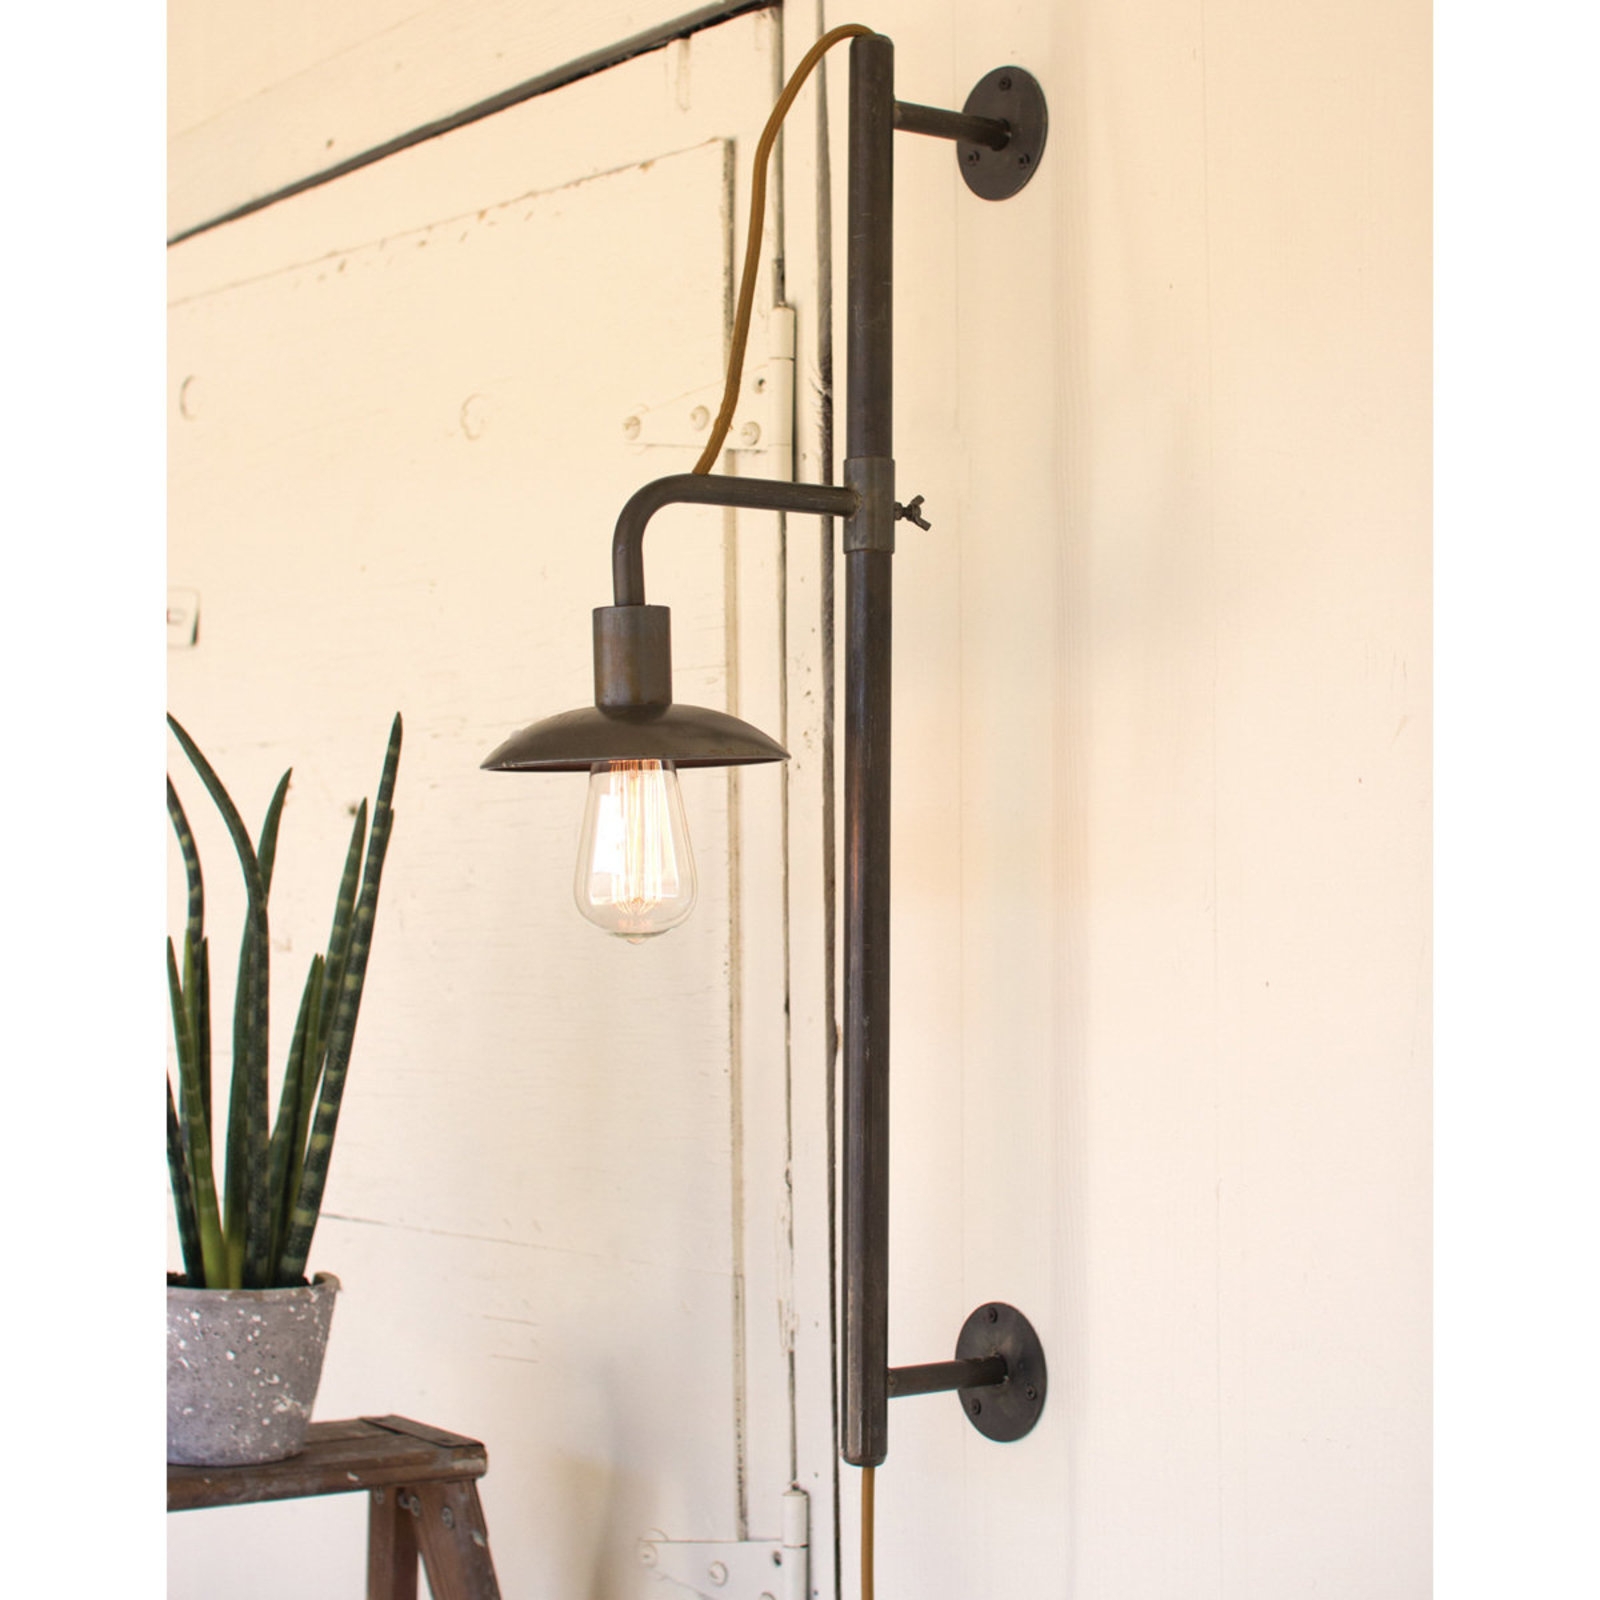 INDUSTRIAL VERTICAL SLIDING WALL SCONCE - Image 0